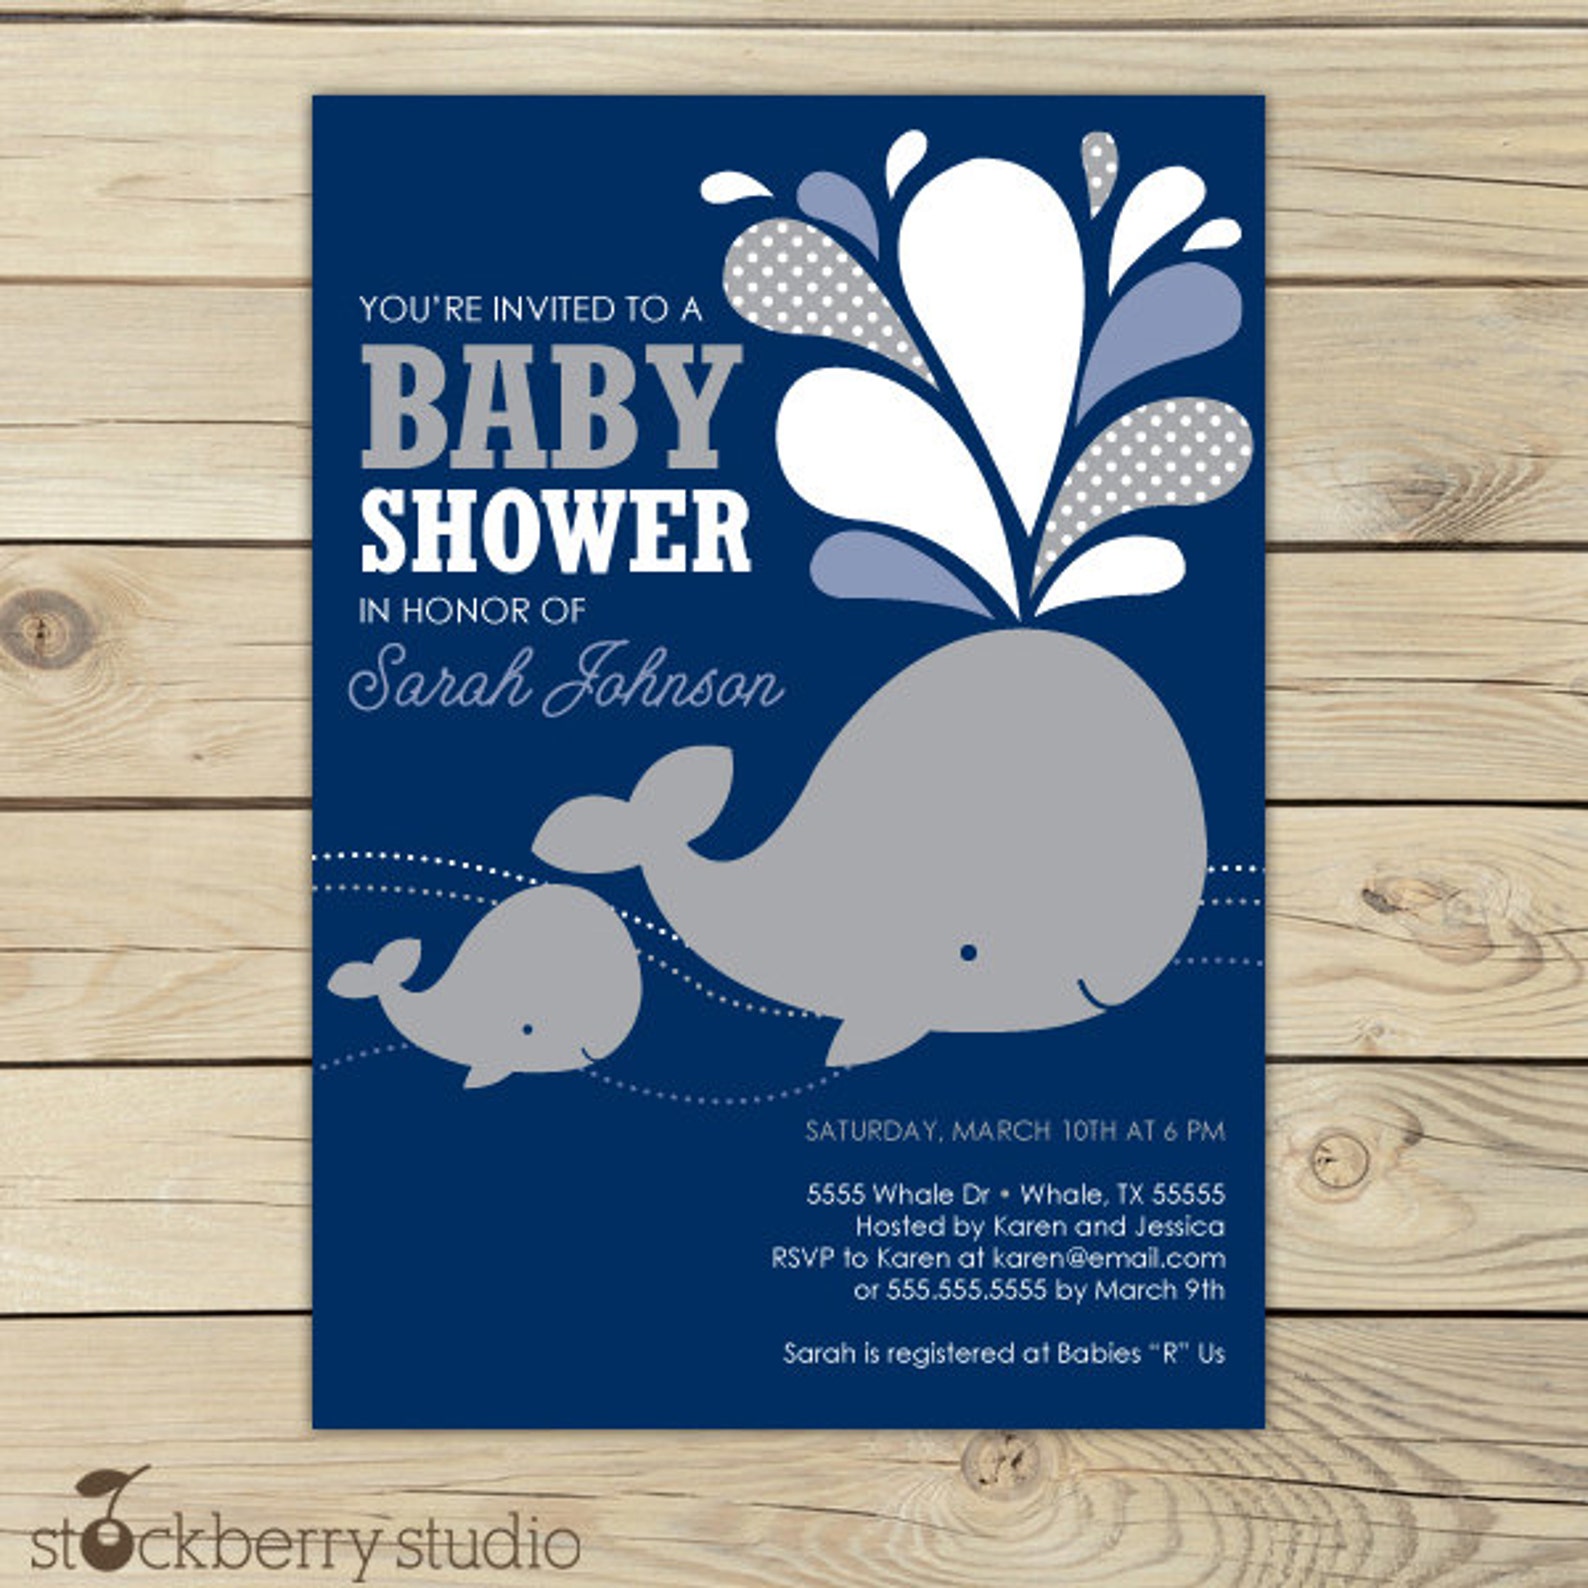 Киты мама текст. Baby boy Shower Invitation. Make an Invitation for a Baby.